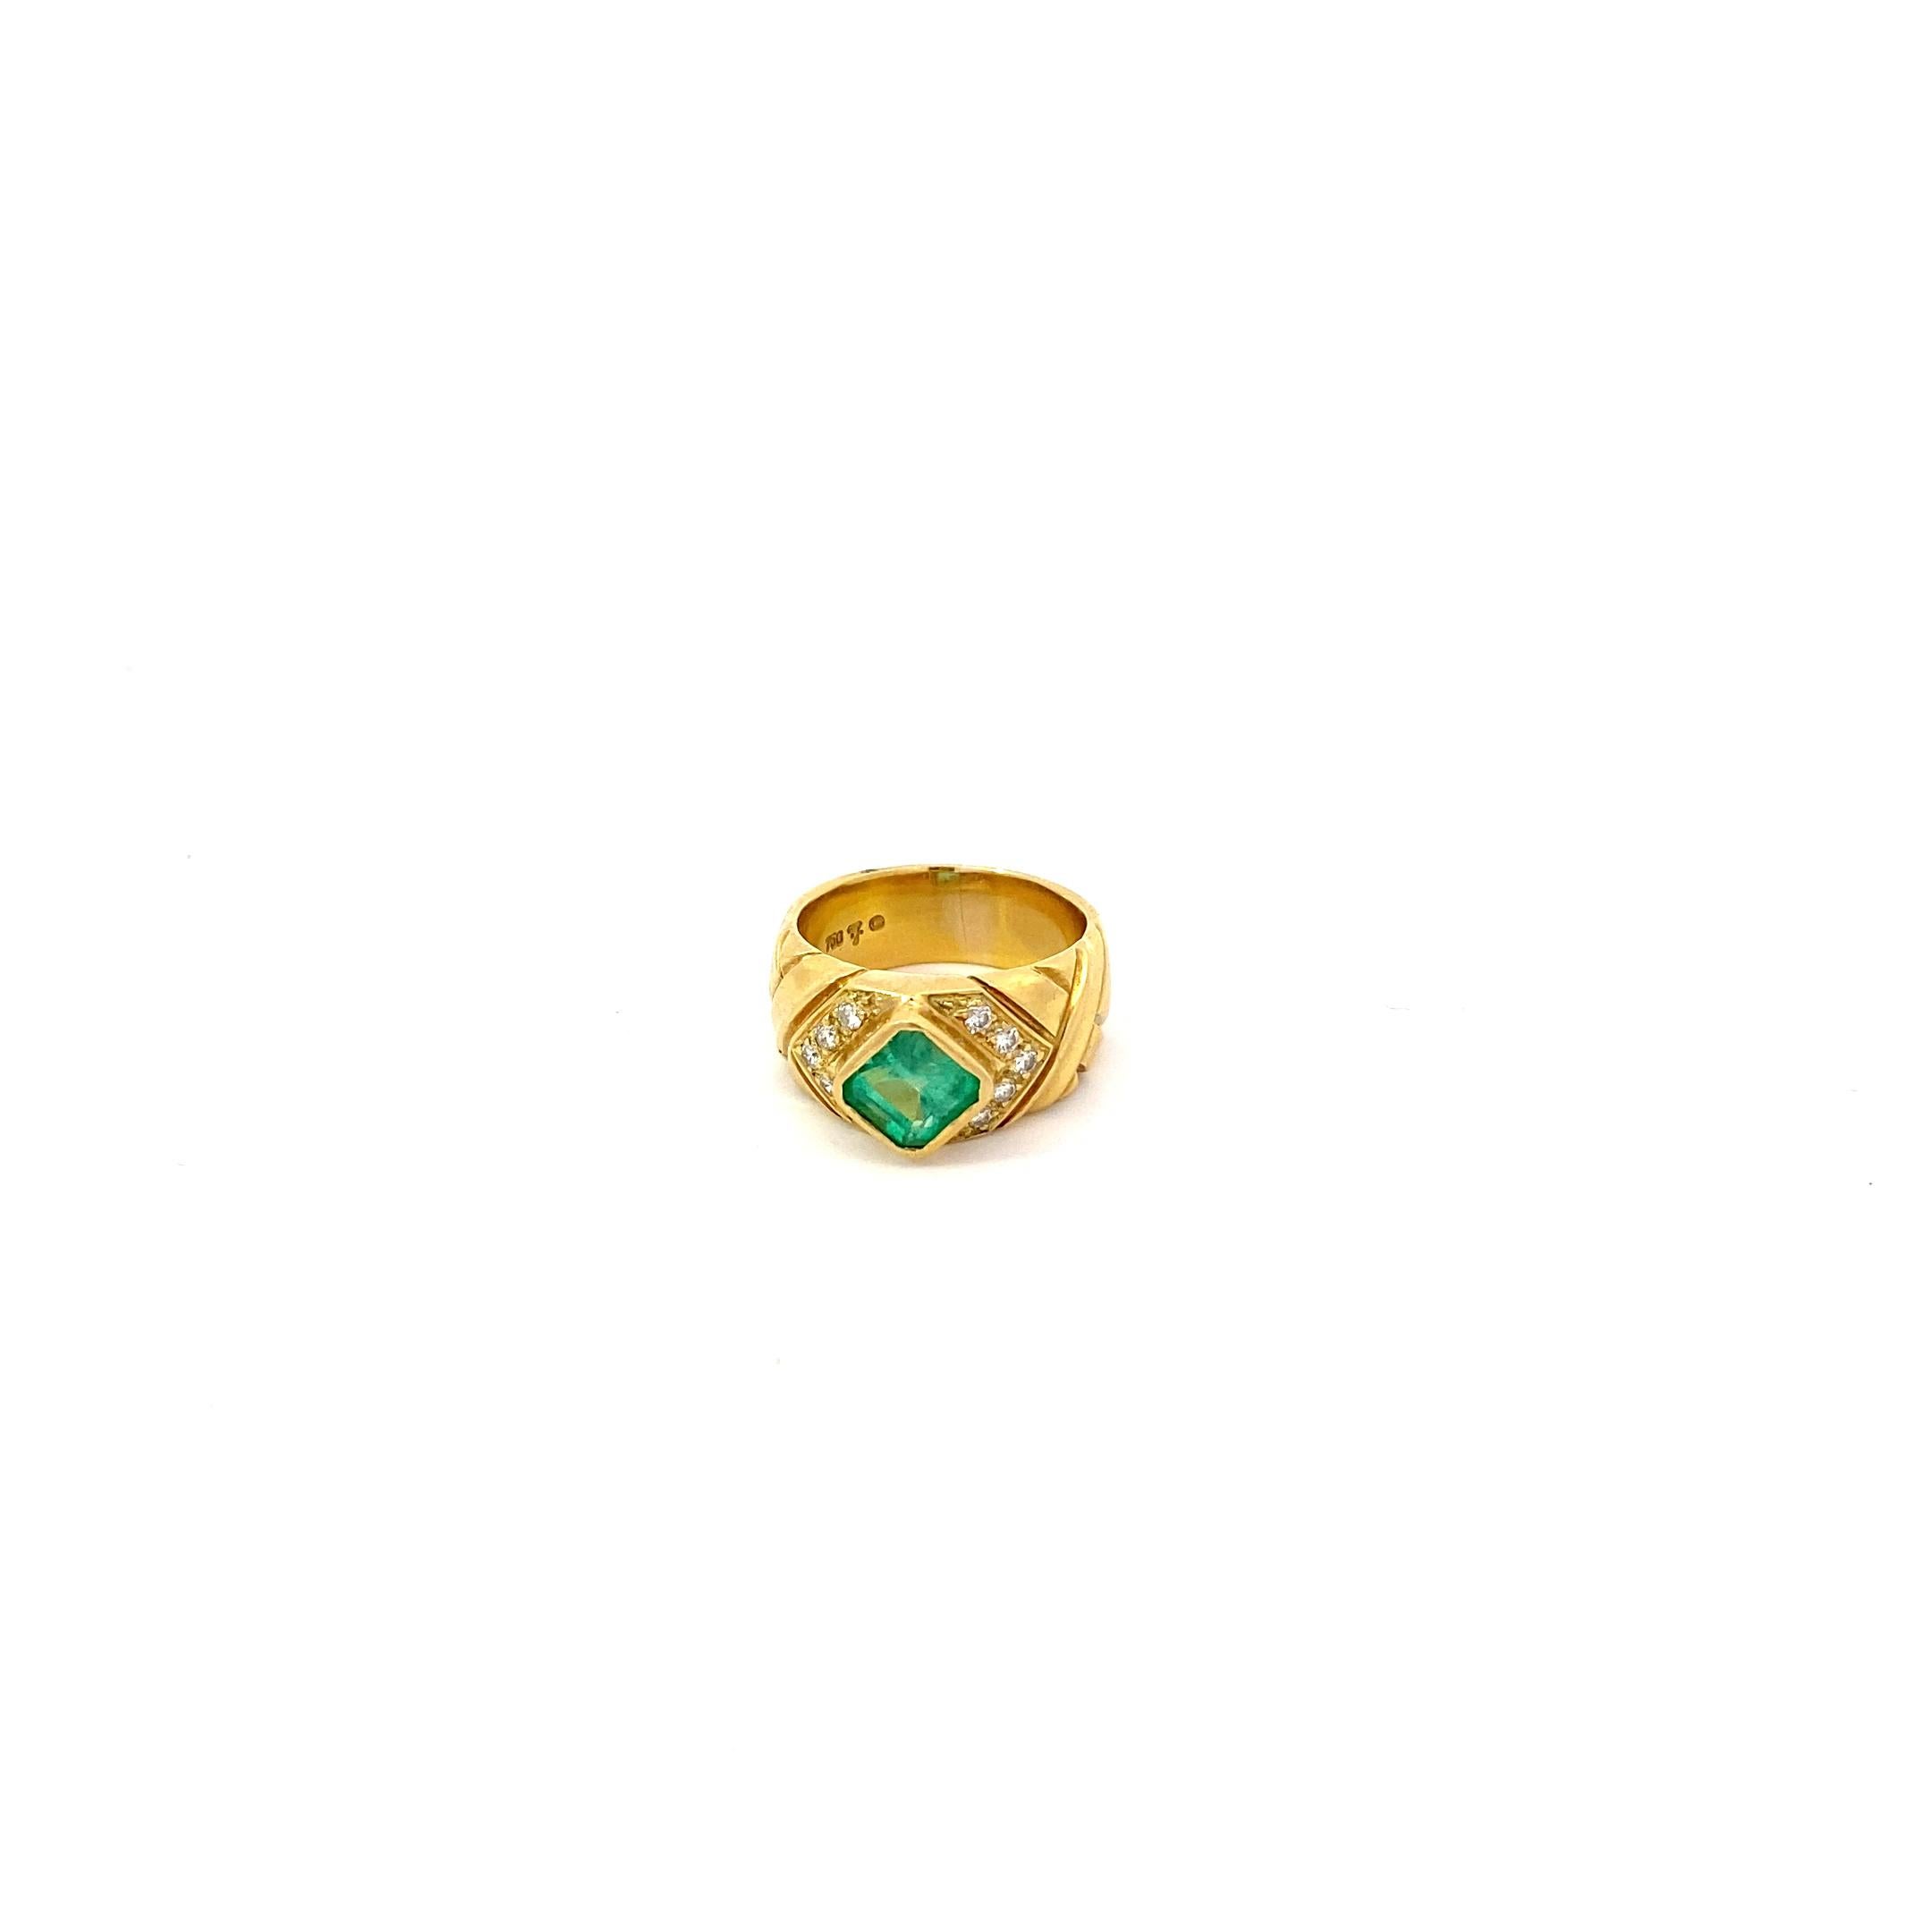 Most likely made during the 1980s, this juicy vintage emerald ring is sure to make your mouth water. 
Weighing in at just over 1ct, this step cut emerald is bezel set in an equally thick luxe 18k yellow band and surrounded by VS clarity, F color